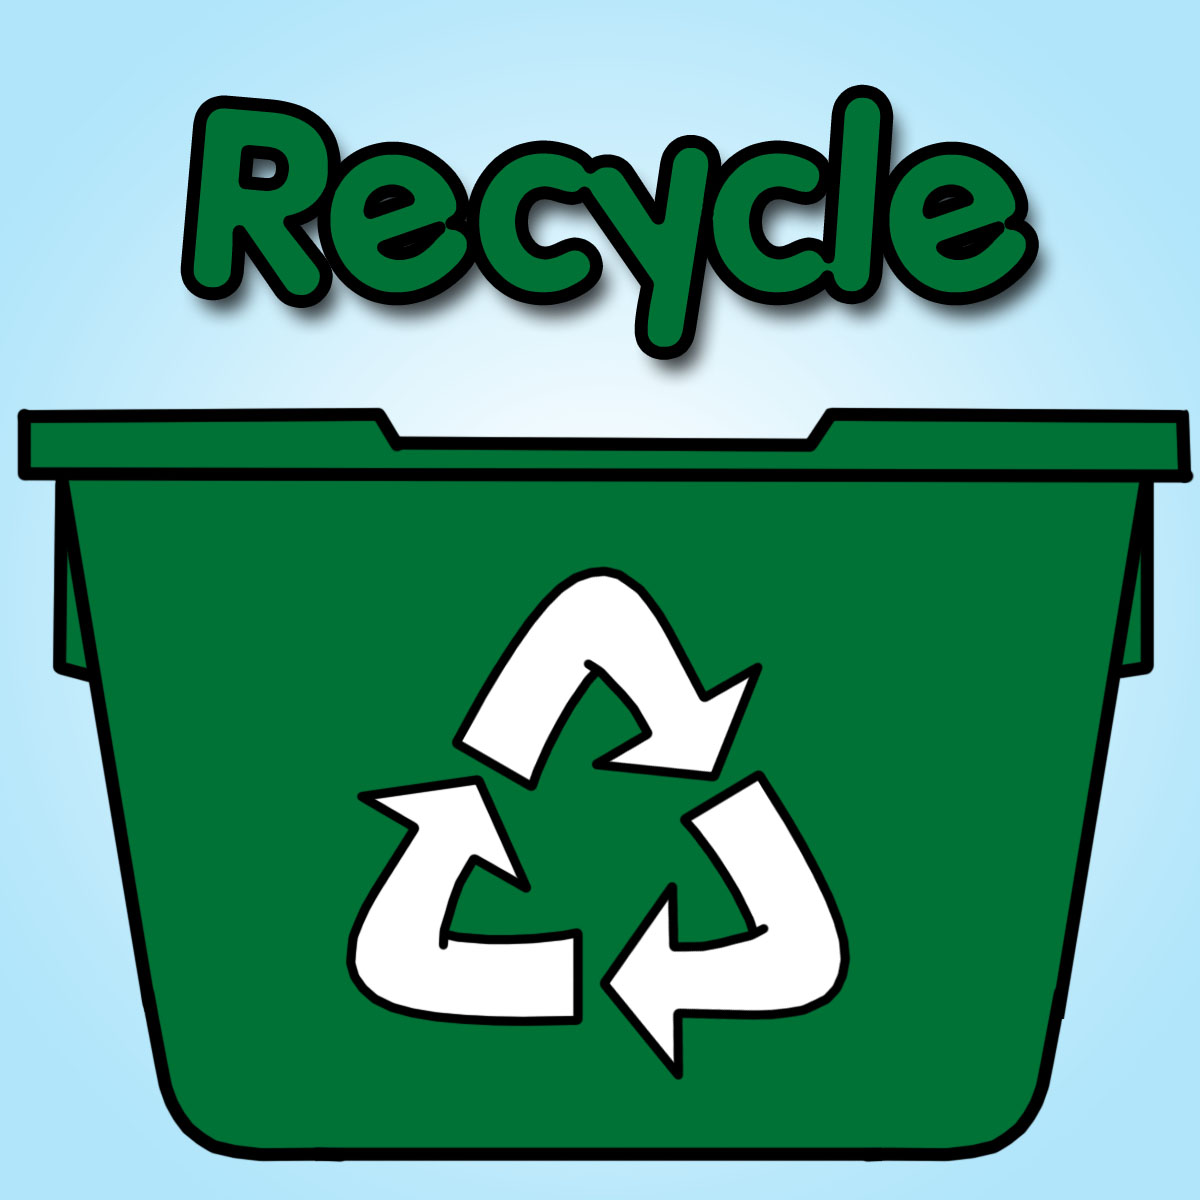 Recycle recycling clip art clipart image